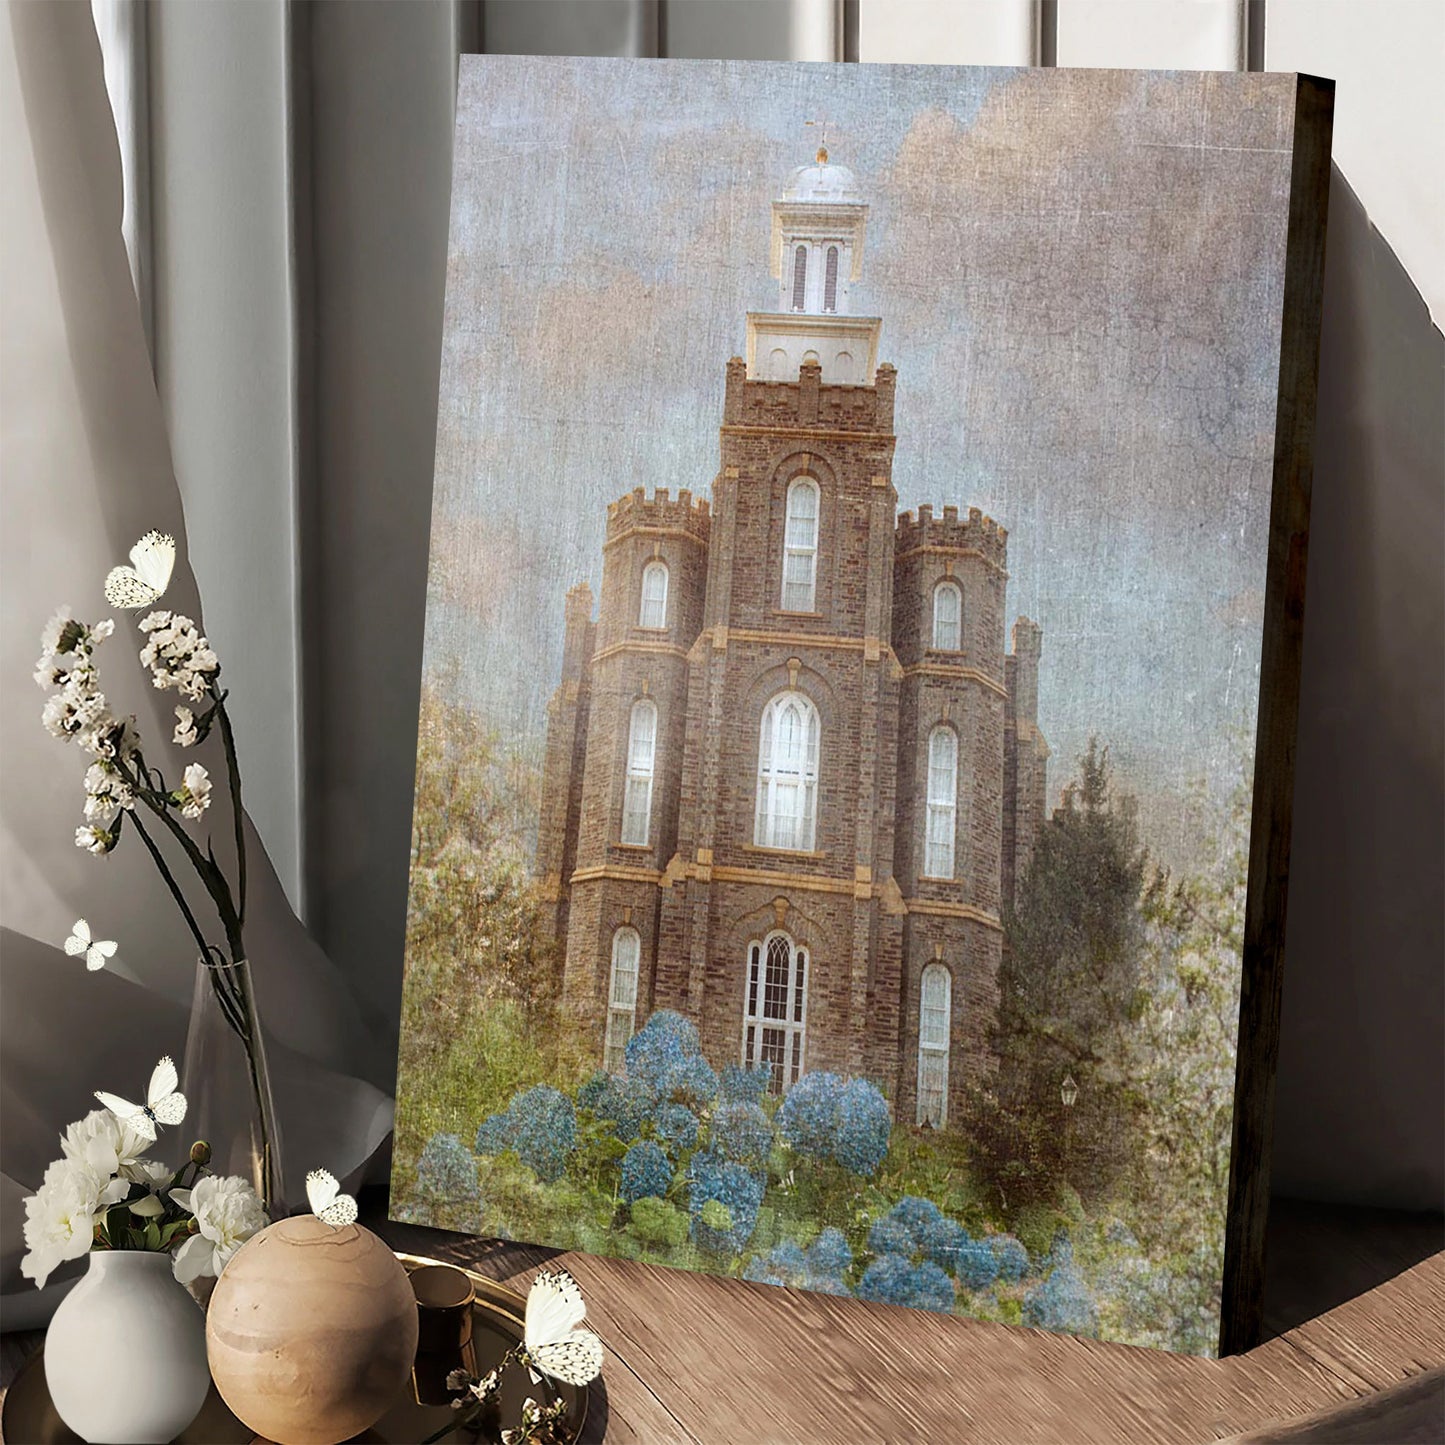 Logan Temple Serenity Canvas Pictures - Jesus Canvas Art - Christian Wall Art